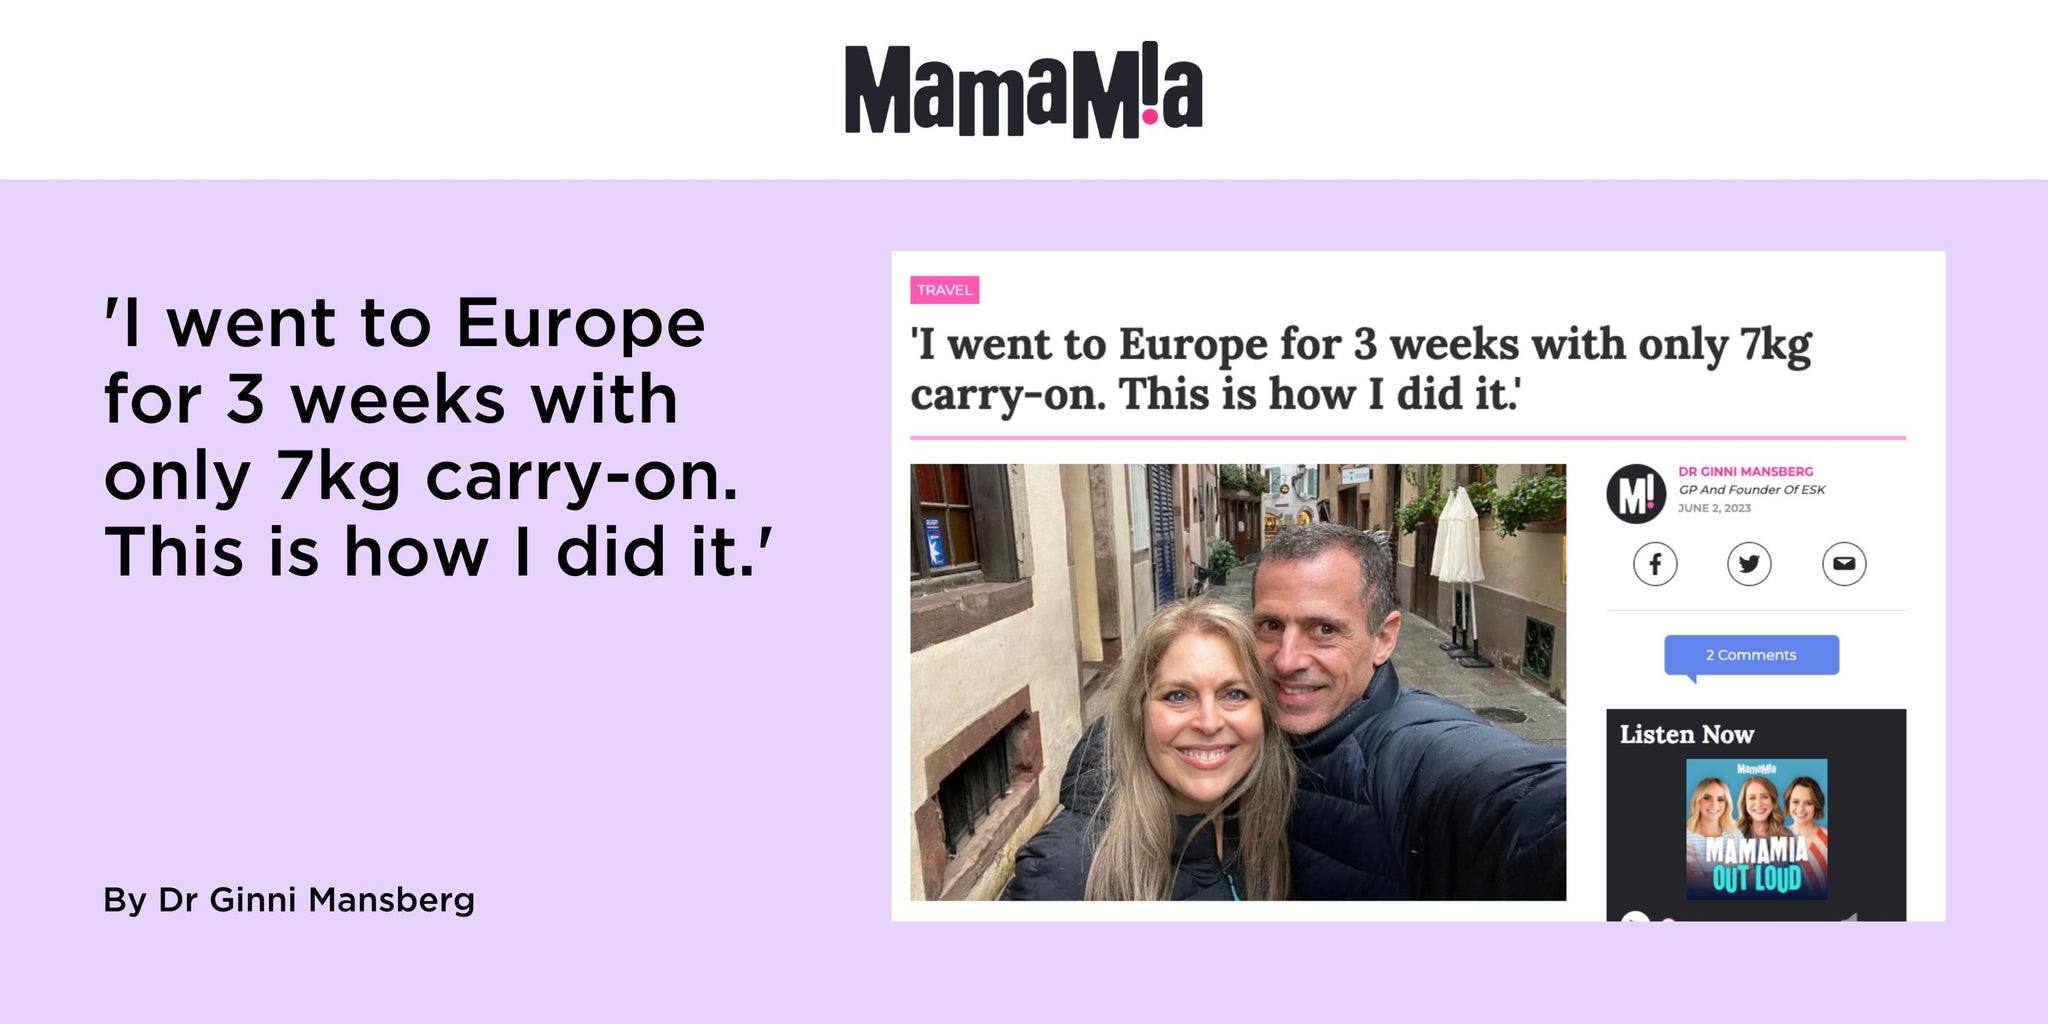 I went to Europe for 3 weeks with only 7kg carry-on. This is how I did it